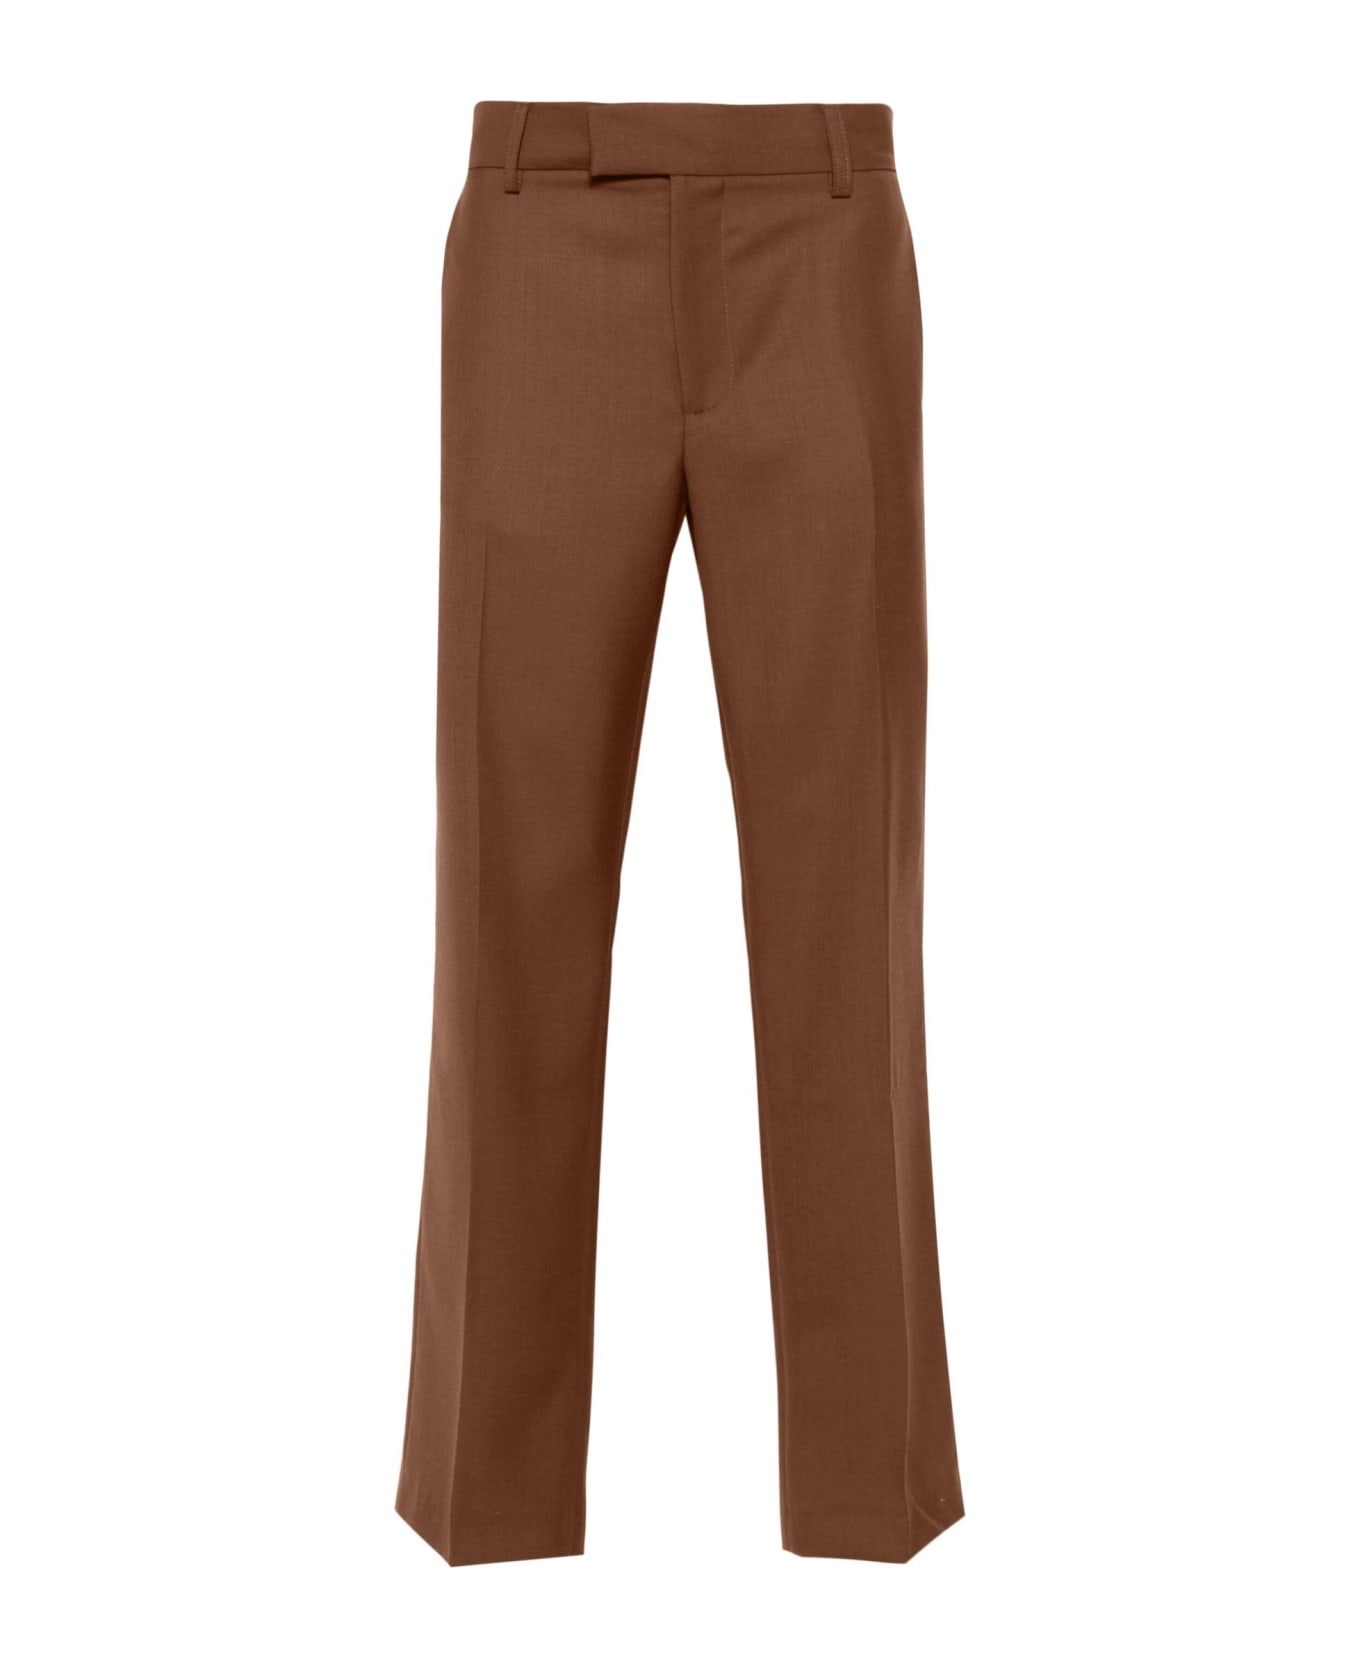 Séfr Sefr Trousers Brown - Brown ボトムス